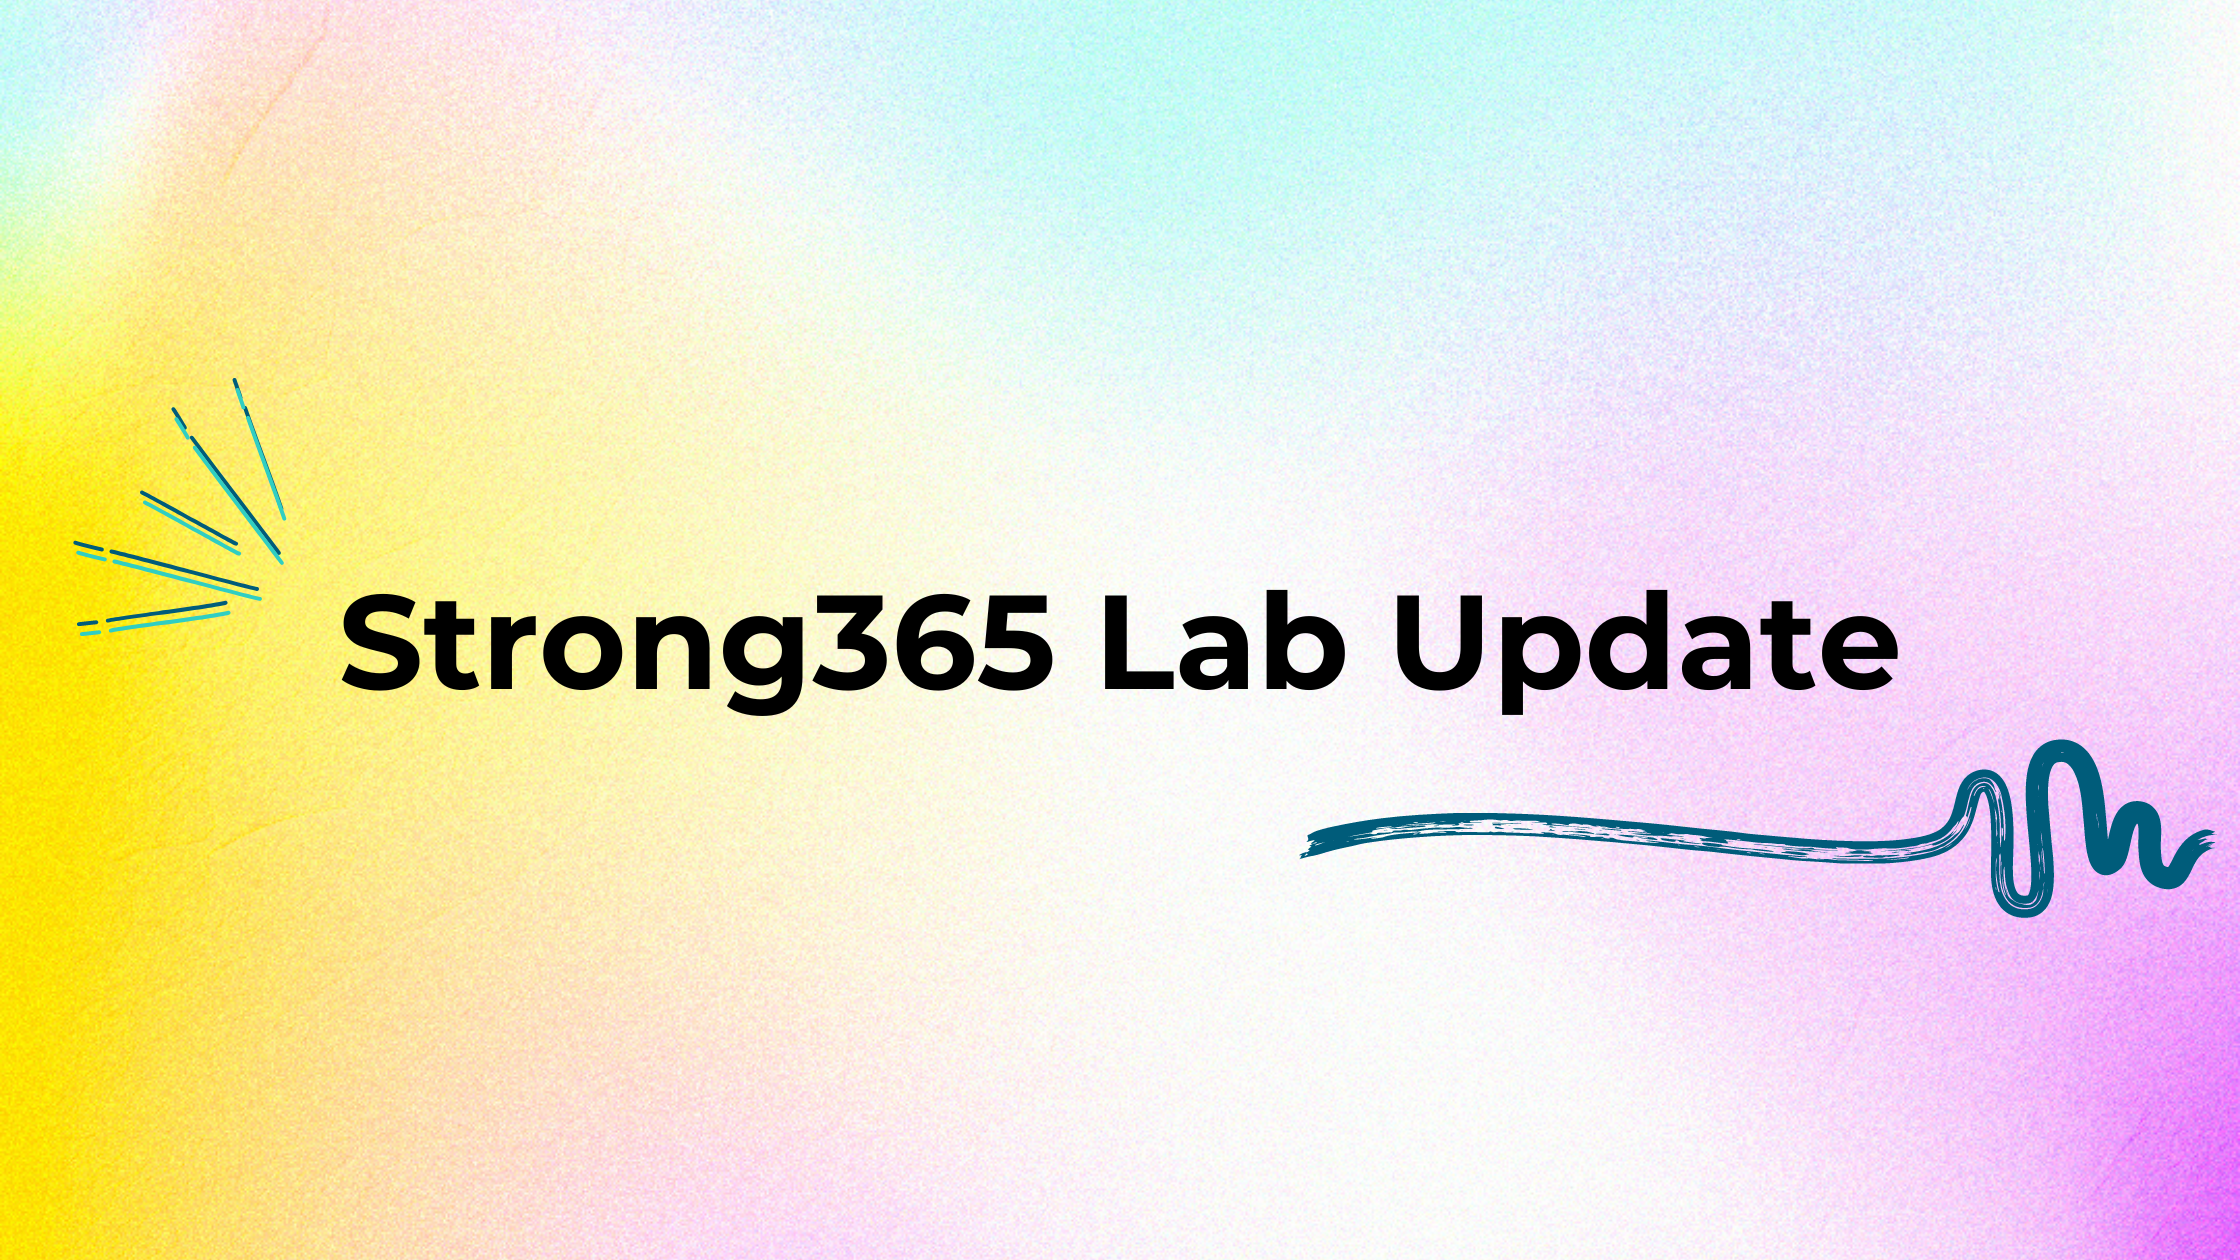 Blog: Strong365 Lab Update Graphic